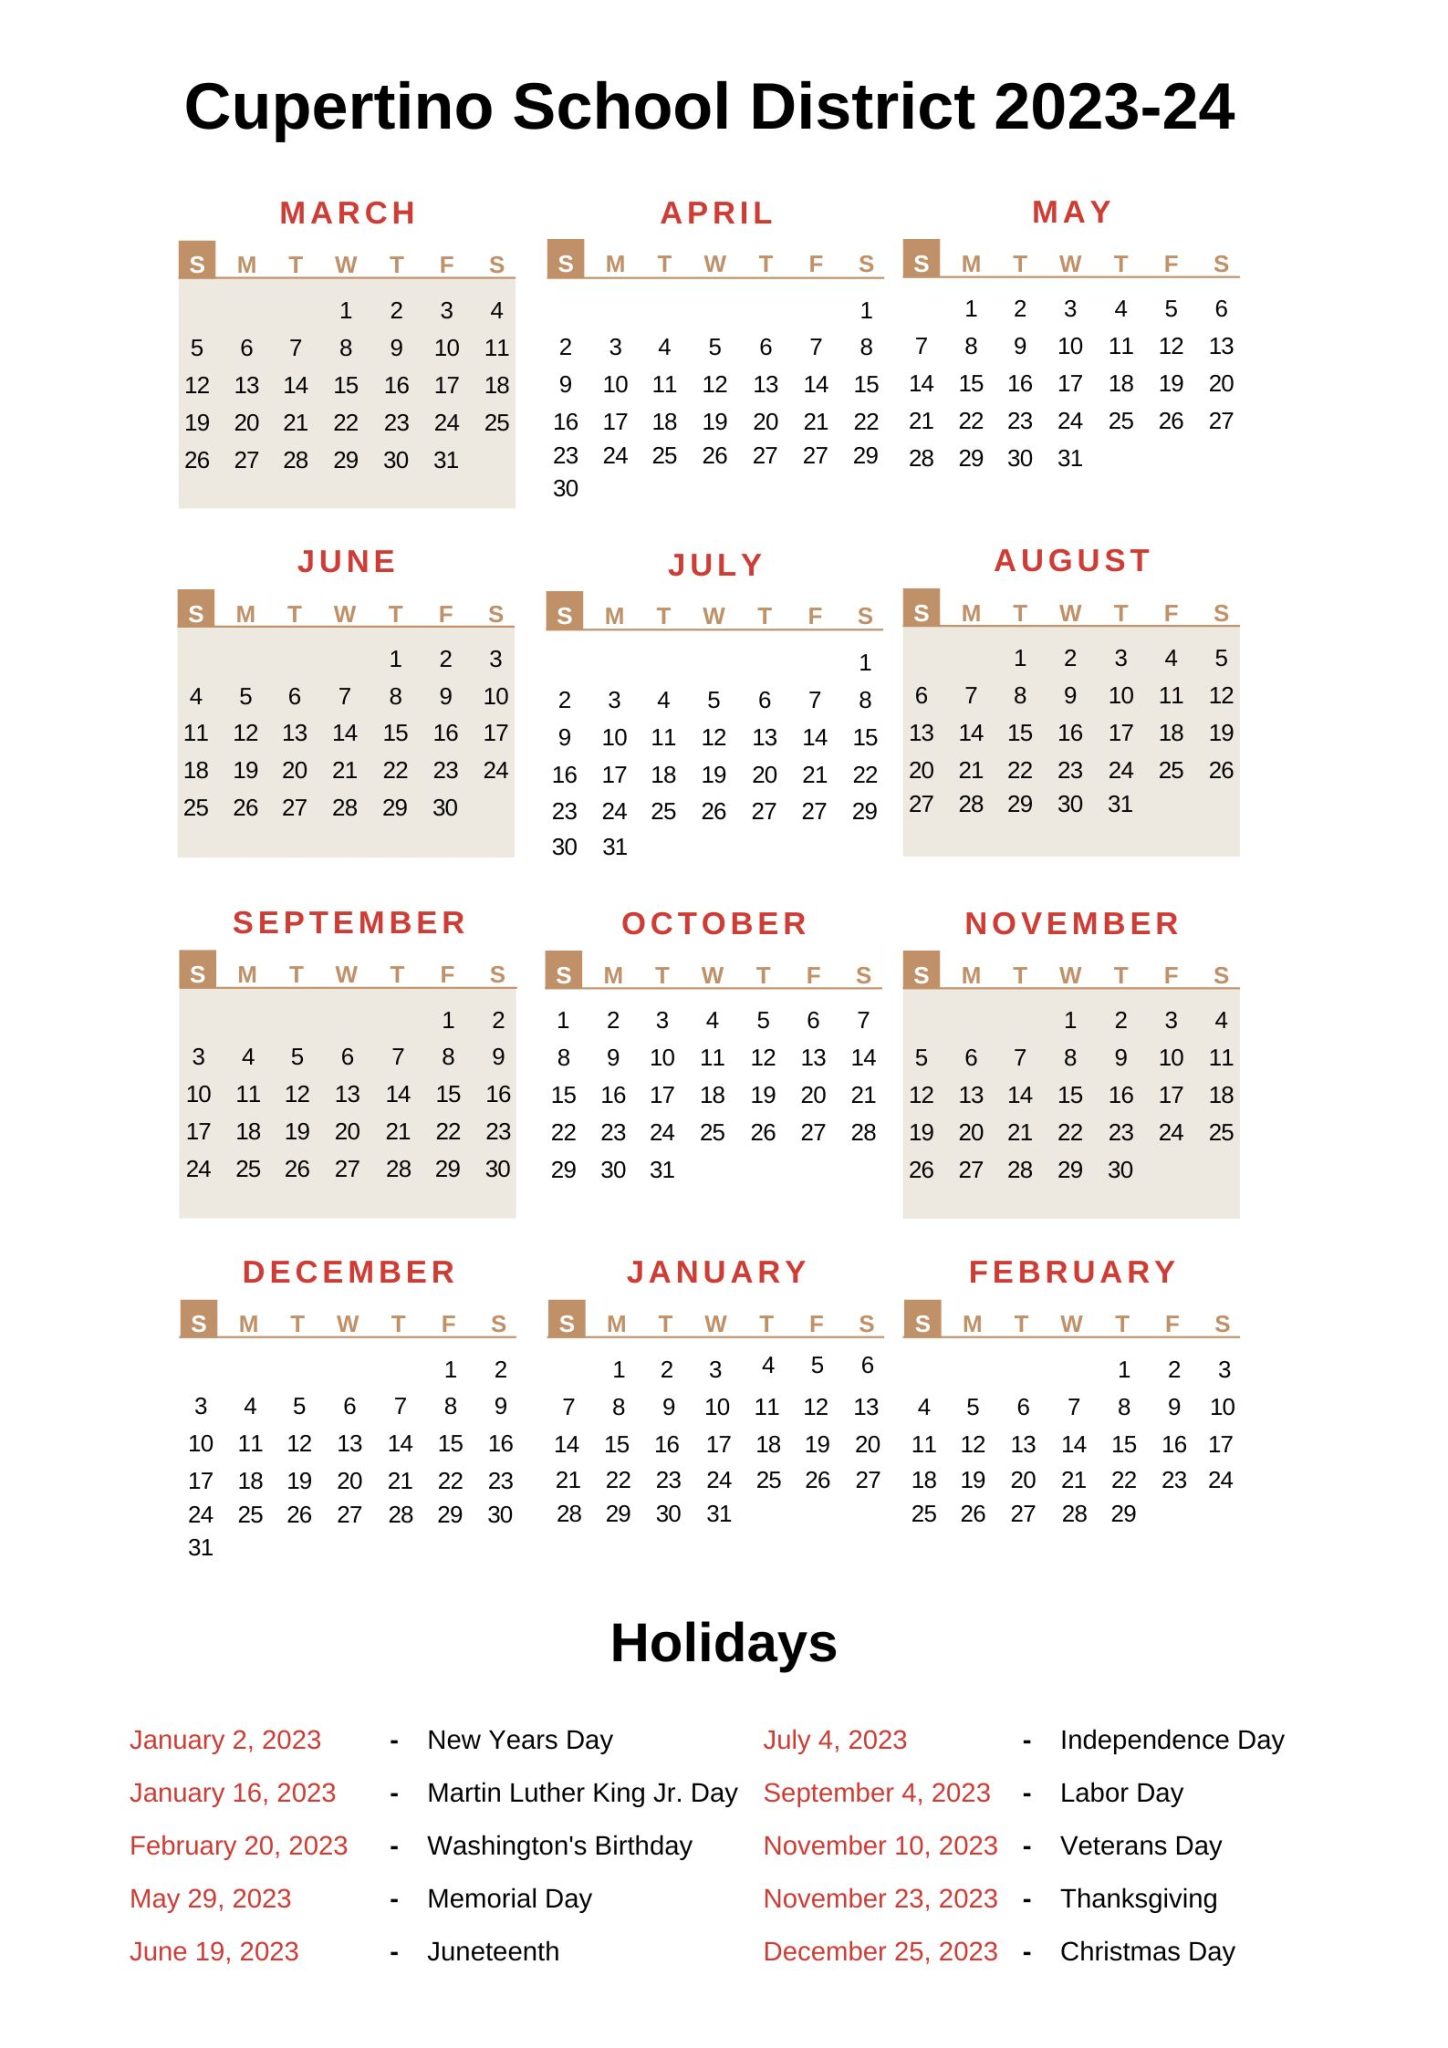 Cupertino School District Calendar 2023 24 With Holidays